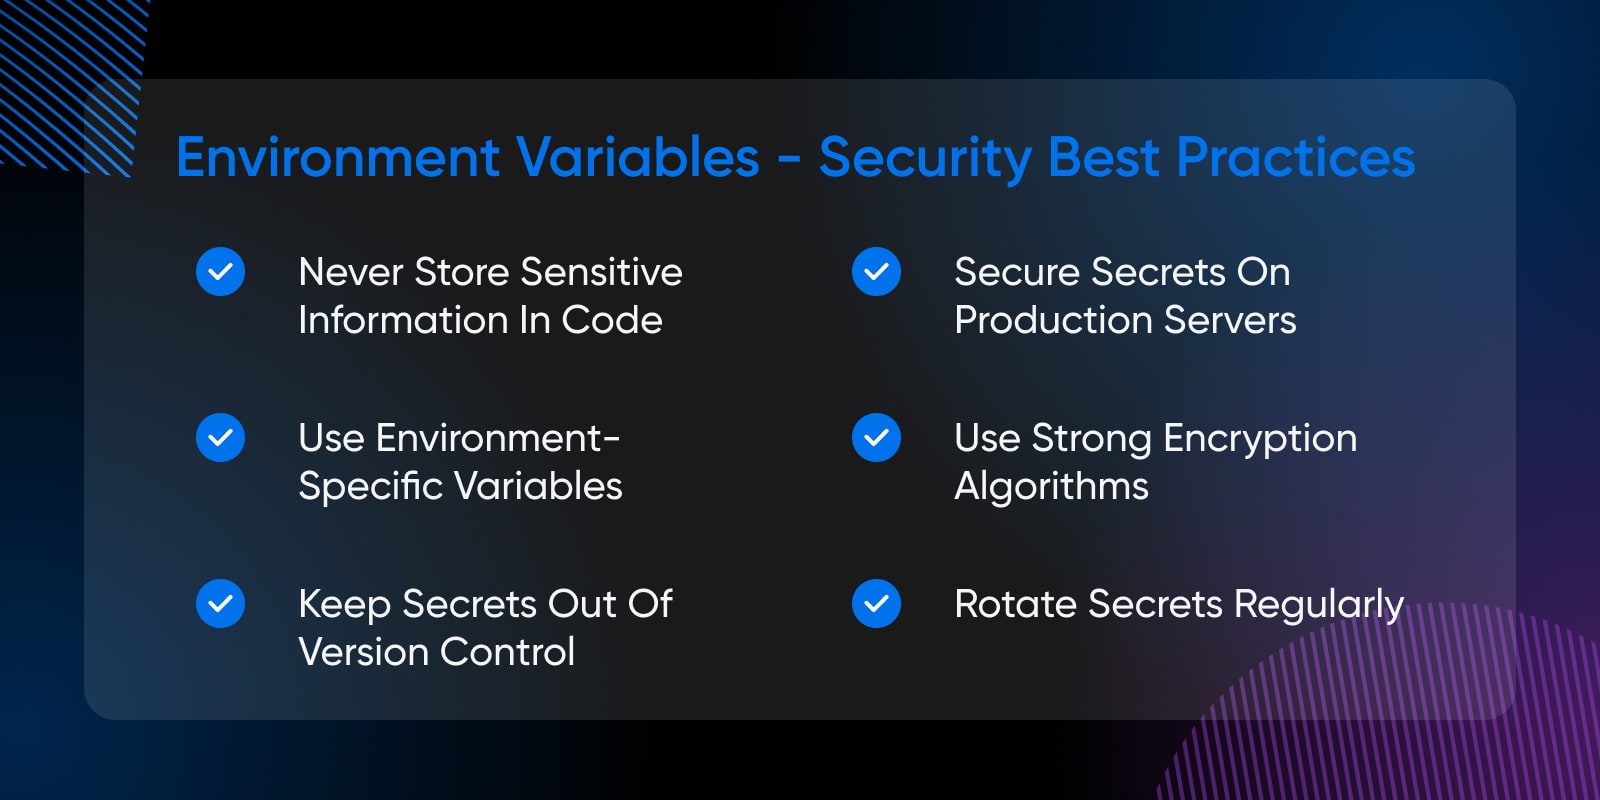 never store sensitive info, use environment-specific variables, keep secrets of out version control, secure secrets on production servers, use strong encryption algorithms, rotate secrets regularly 